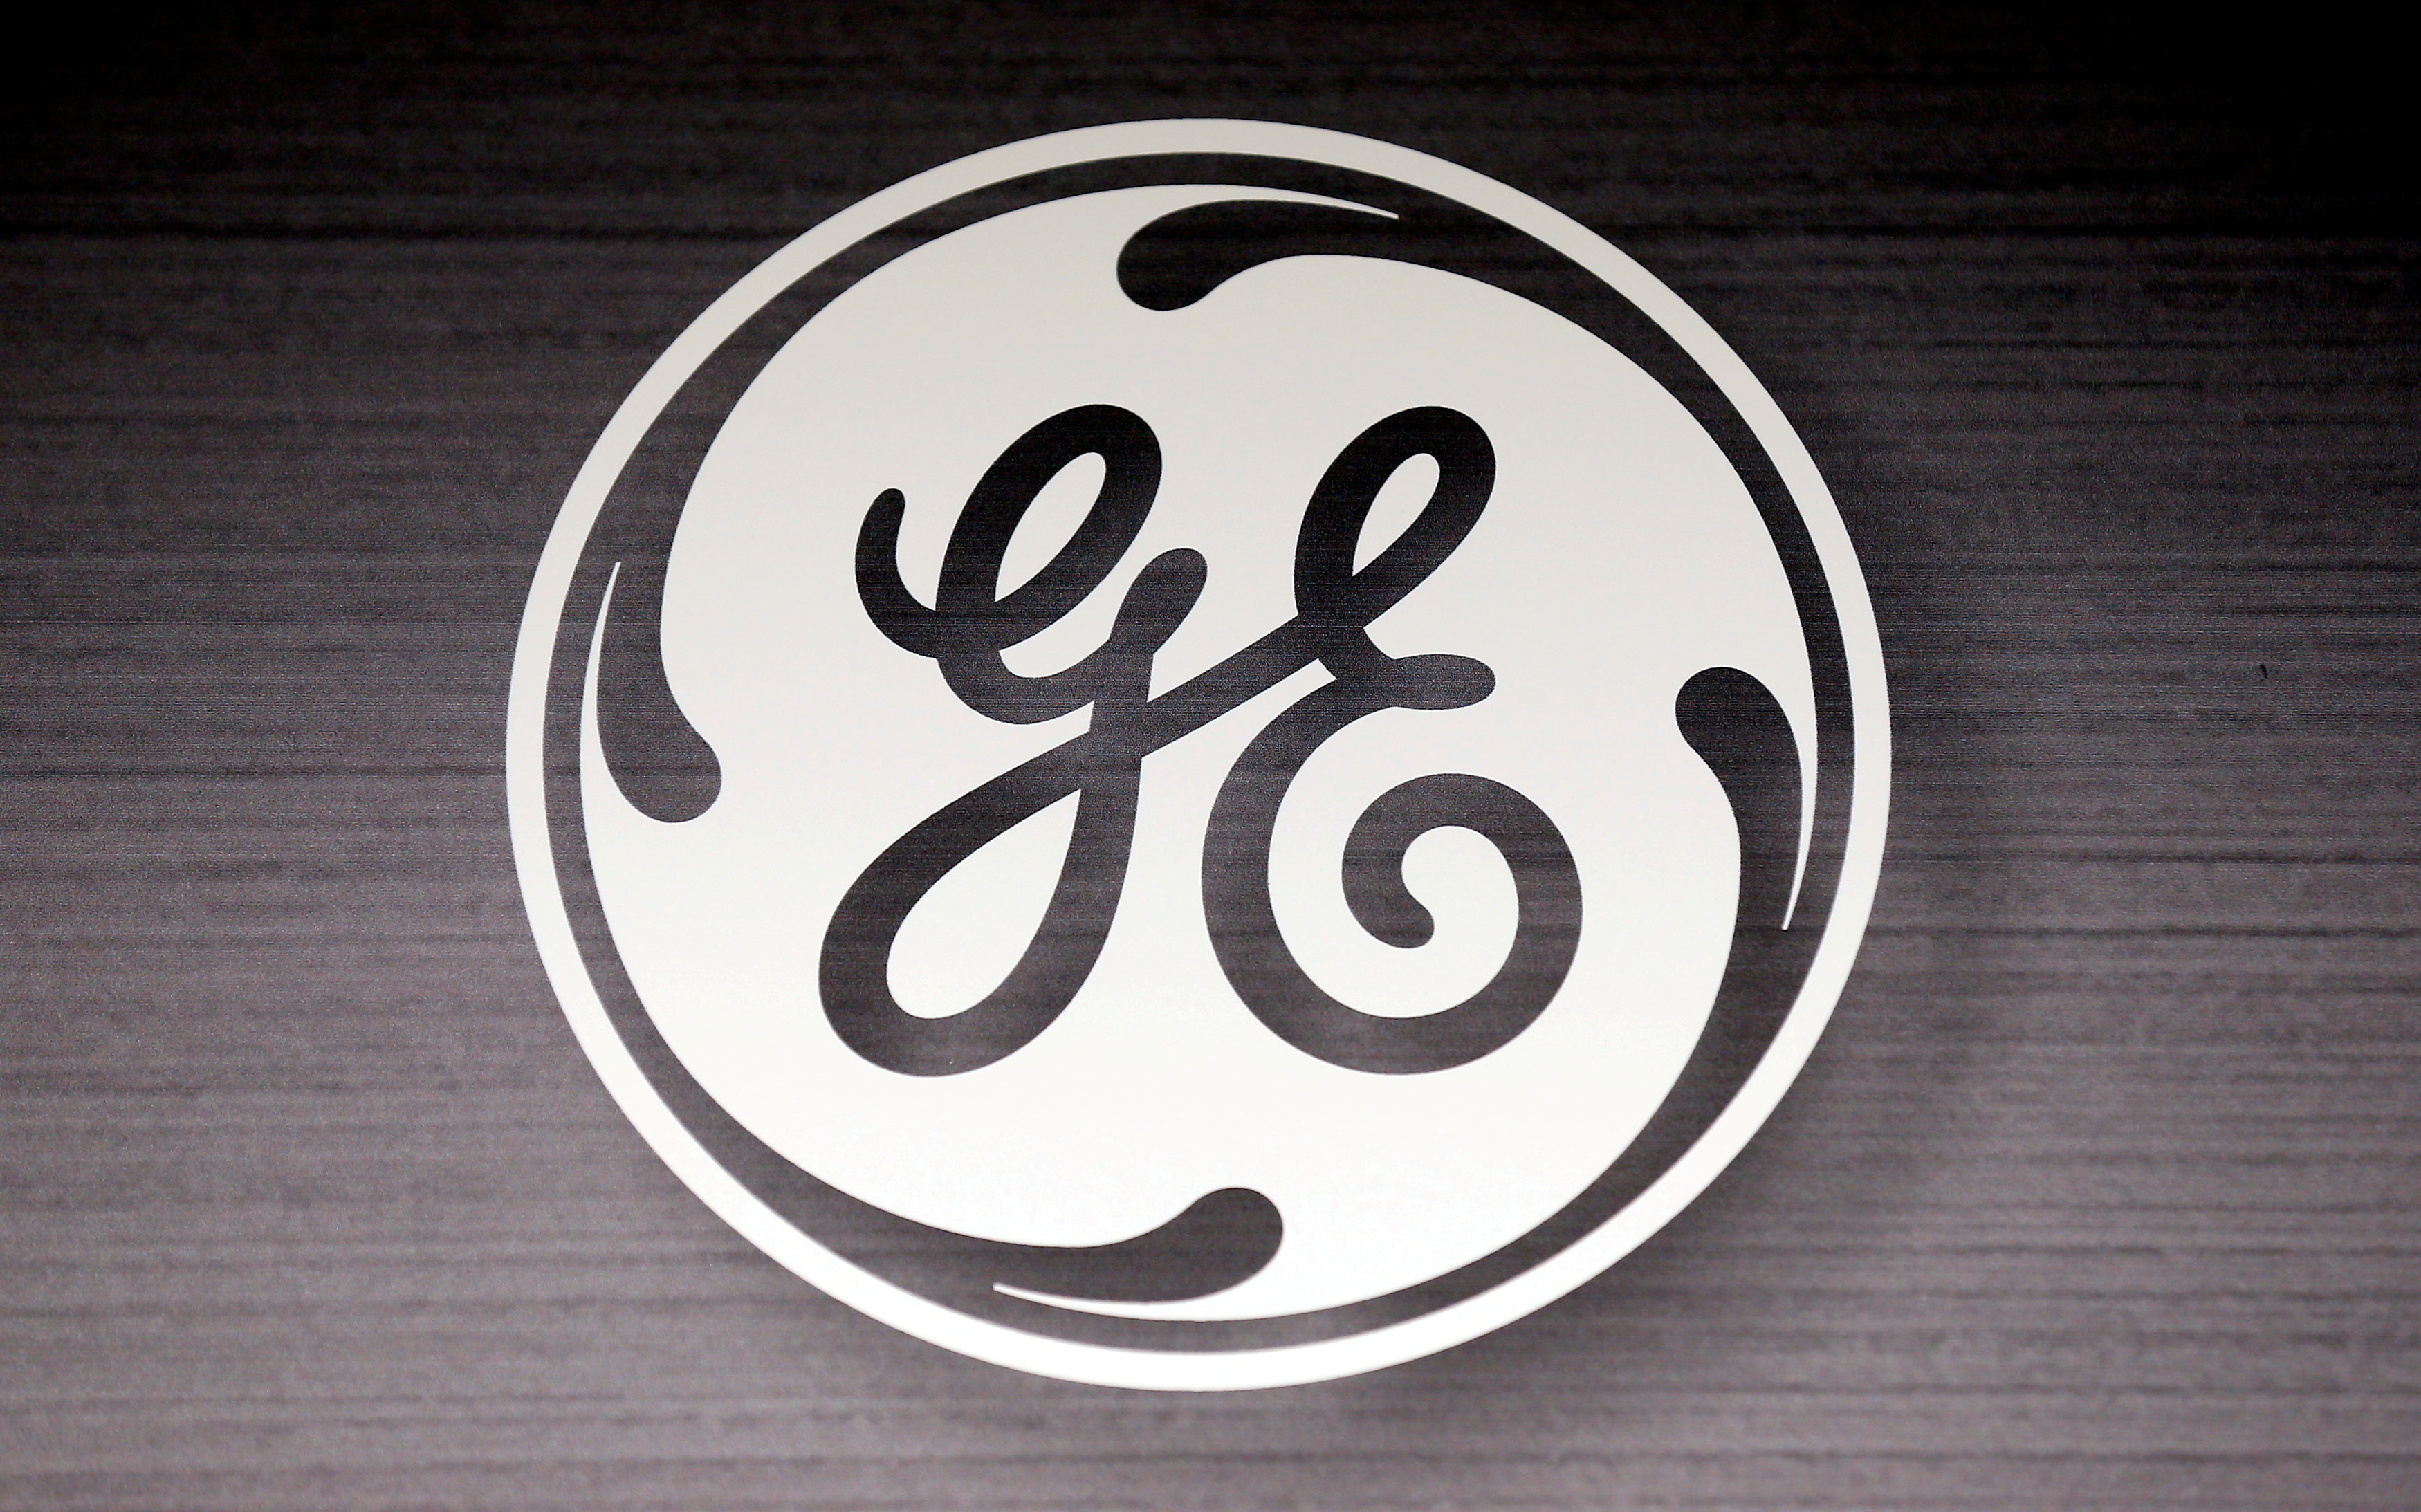 The General Electric logo is seen in a Sears store in Illinois